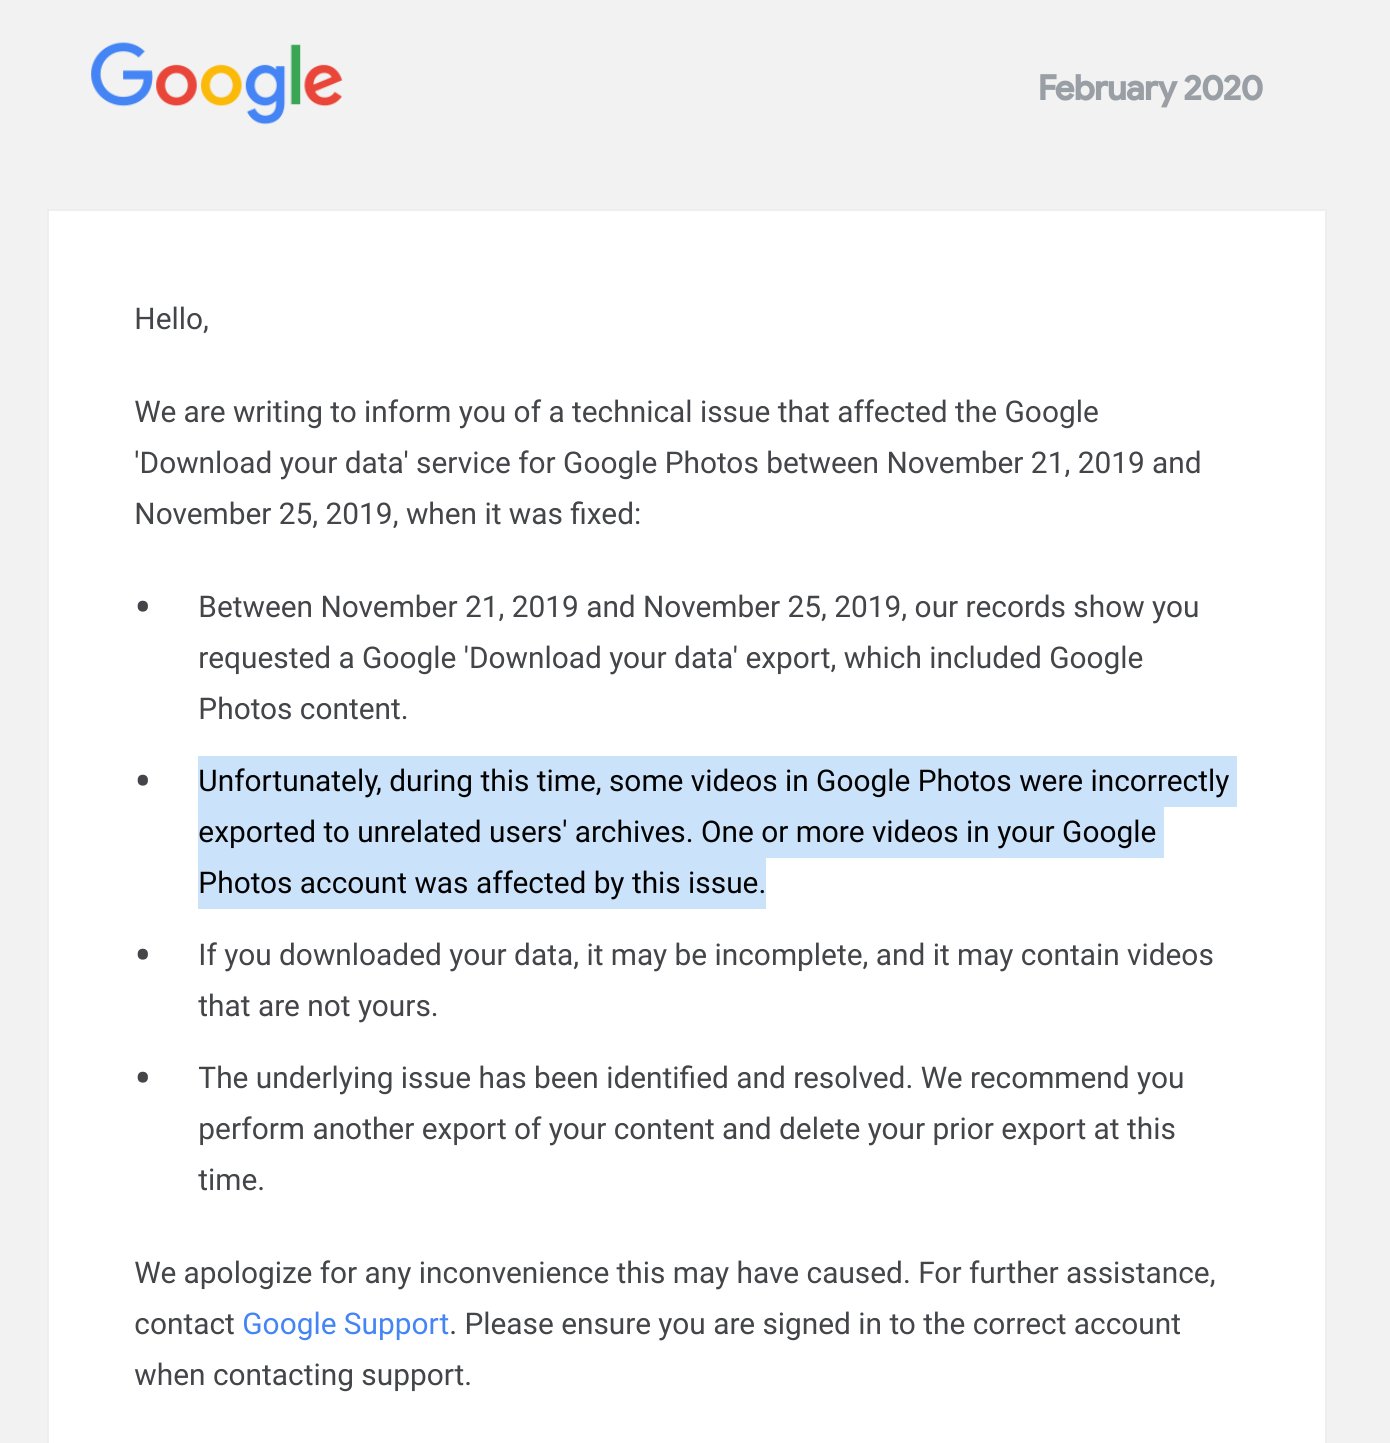 Google Takeout LEAKED users' private videos